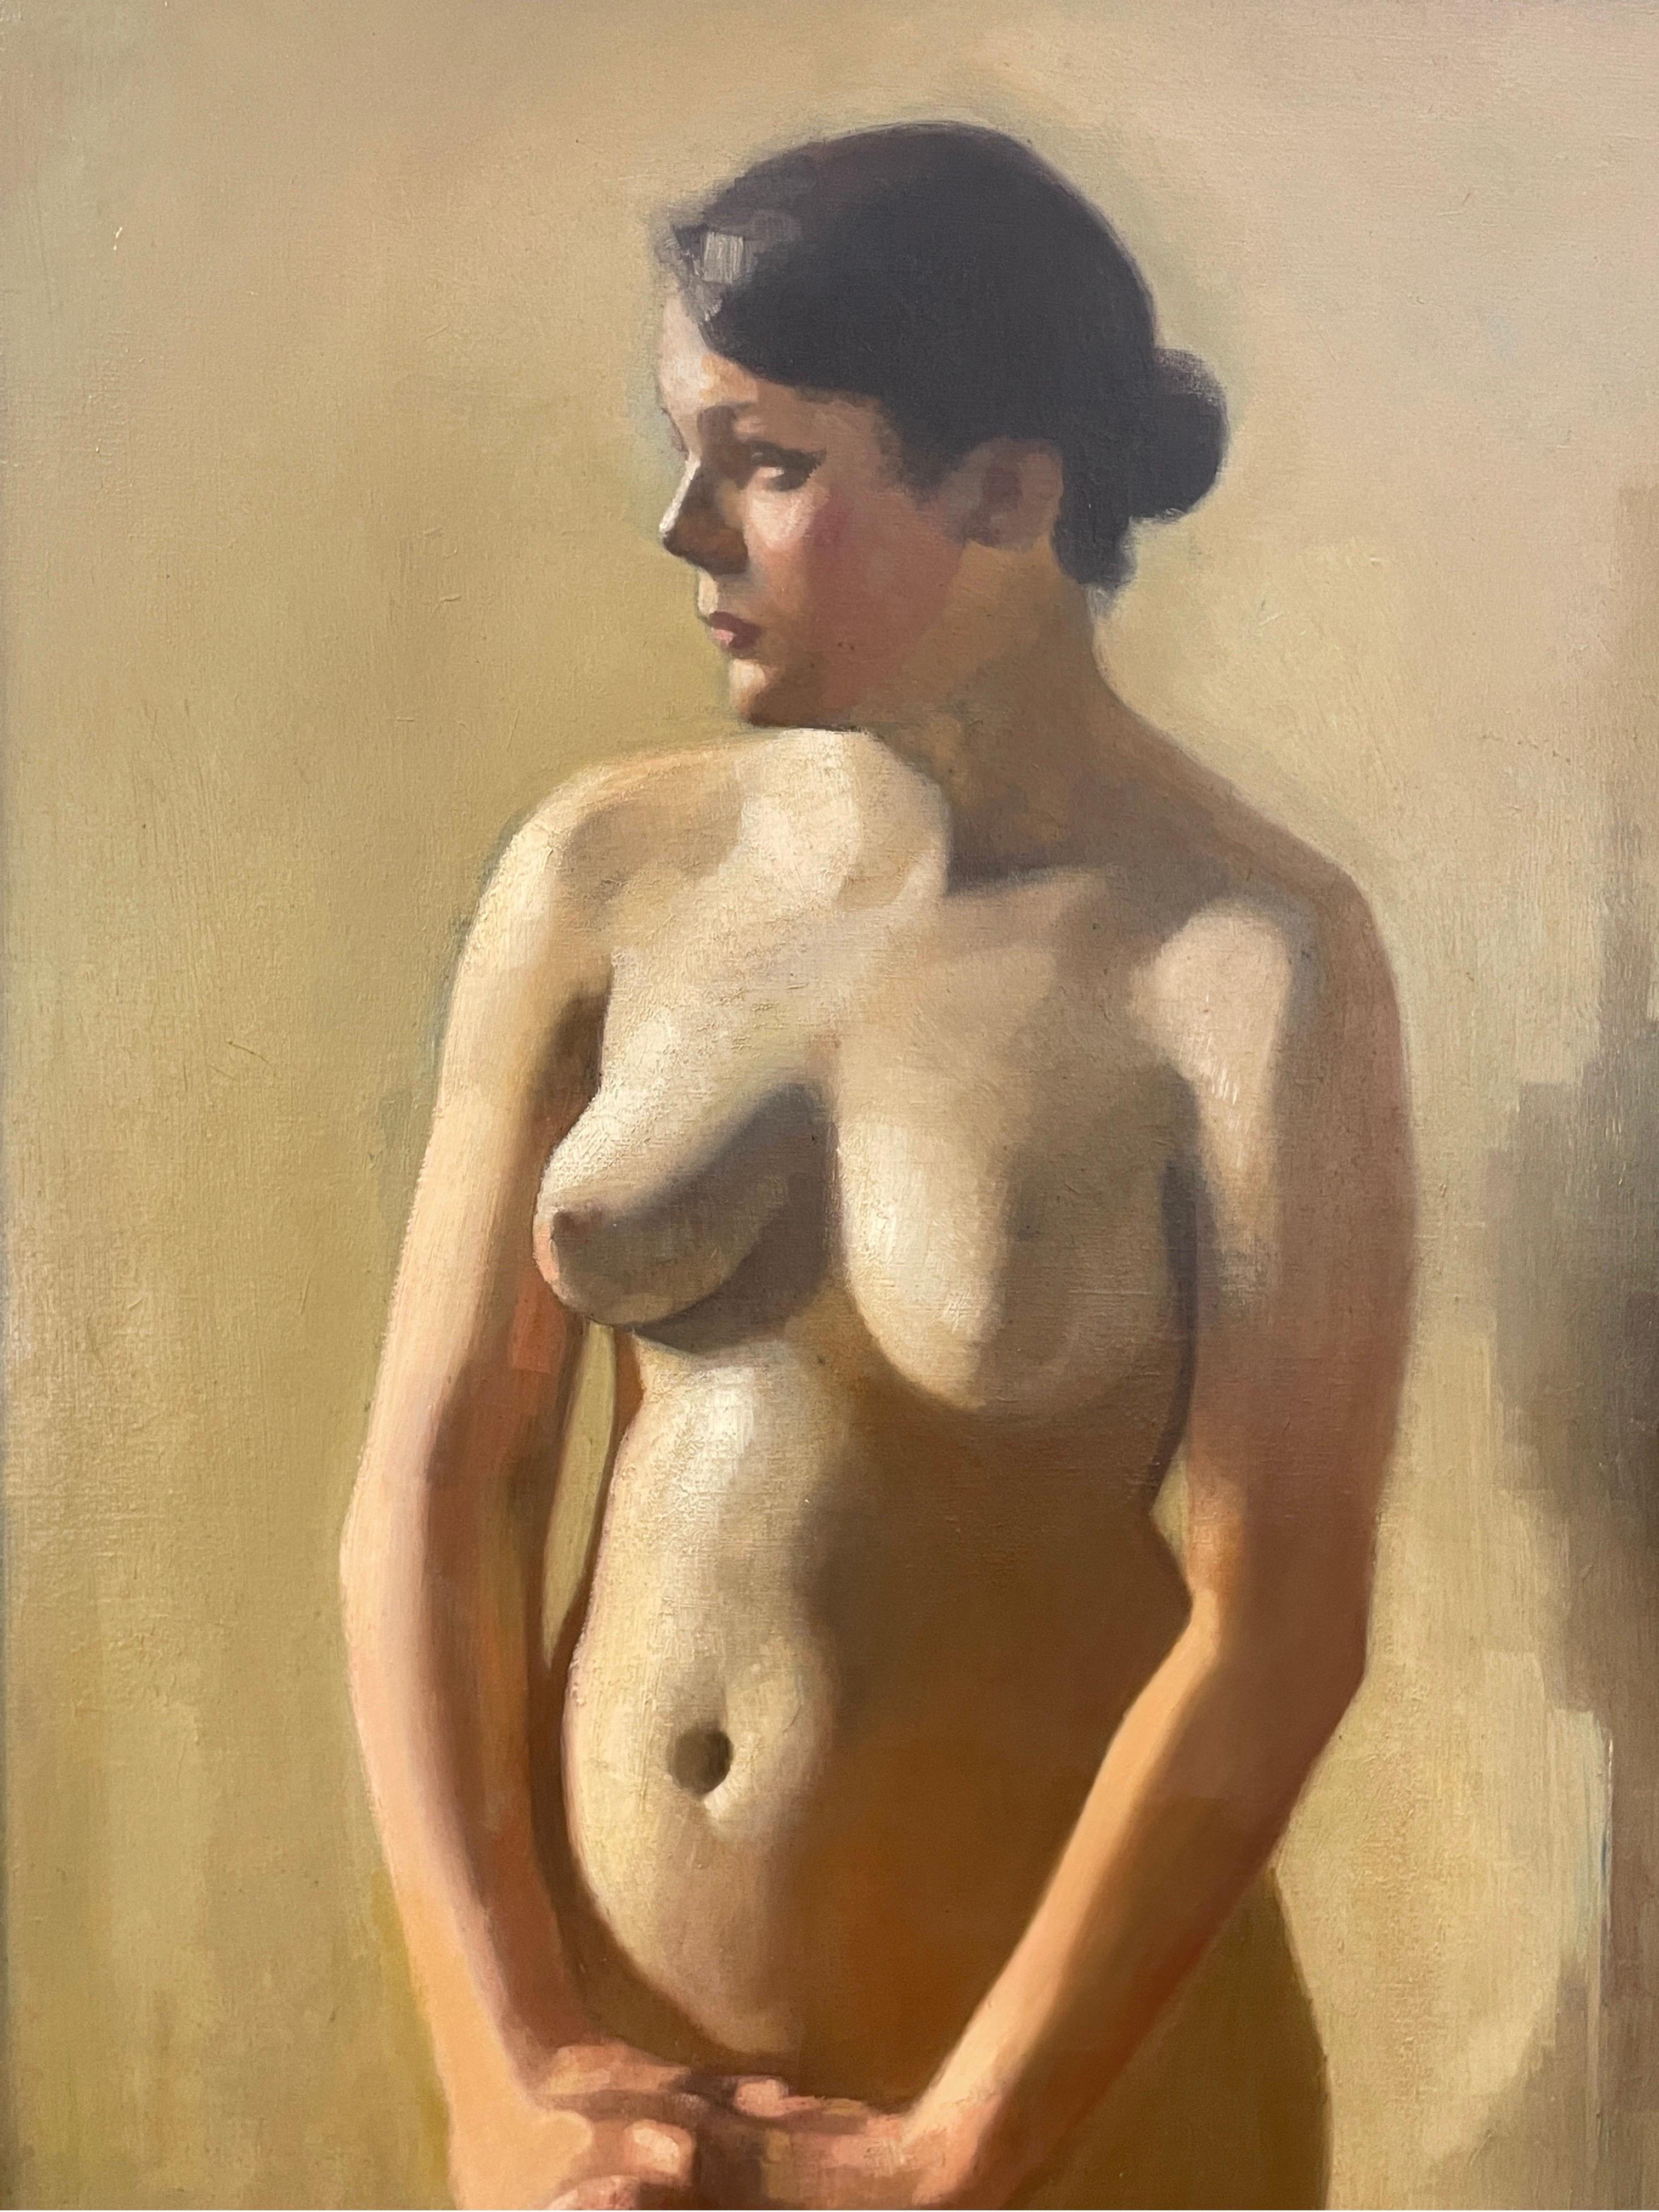 Female Nude Portrait
by J. Loots, Dutch School, early 20th century
signed and inscribed verso
oil painting on canvas, framed
framed size: 77 inches high x 43 inches wide. 
condition: very good and presentable (old repair patches evident